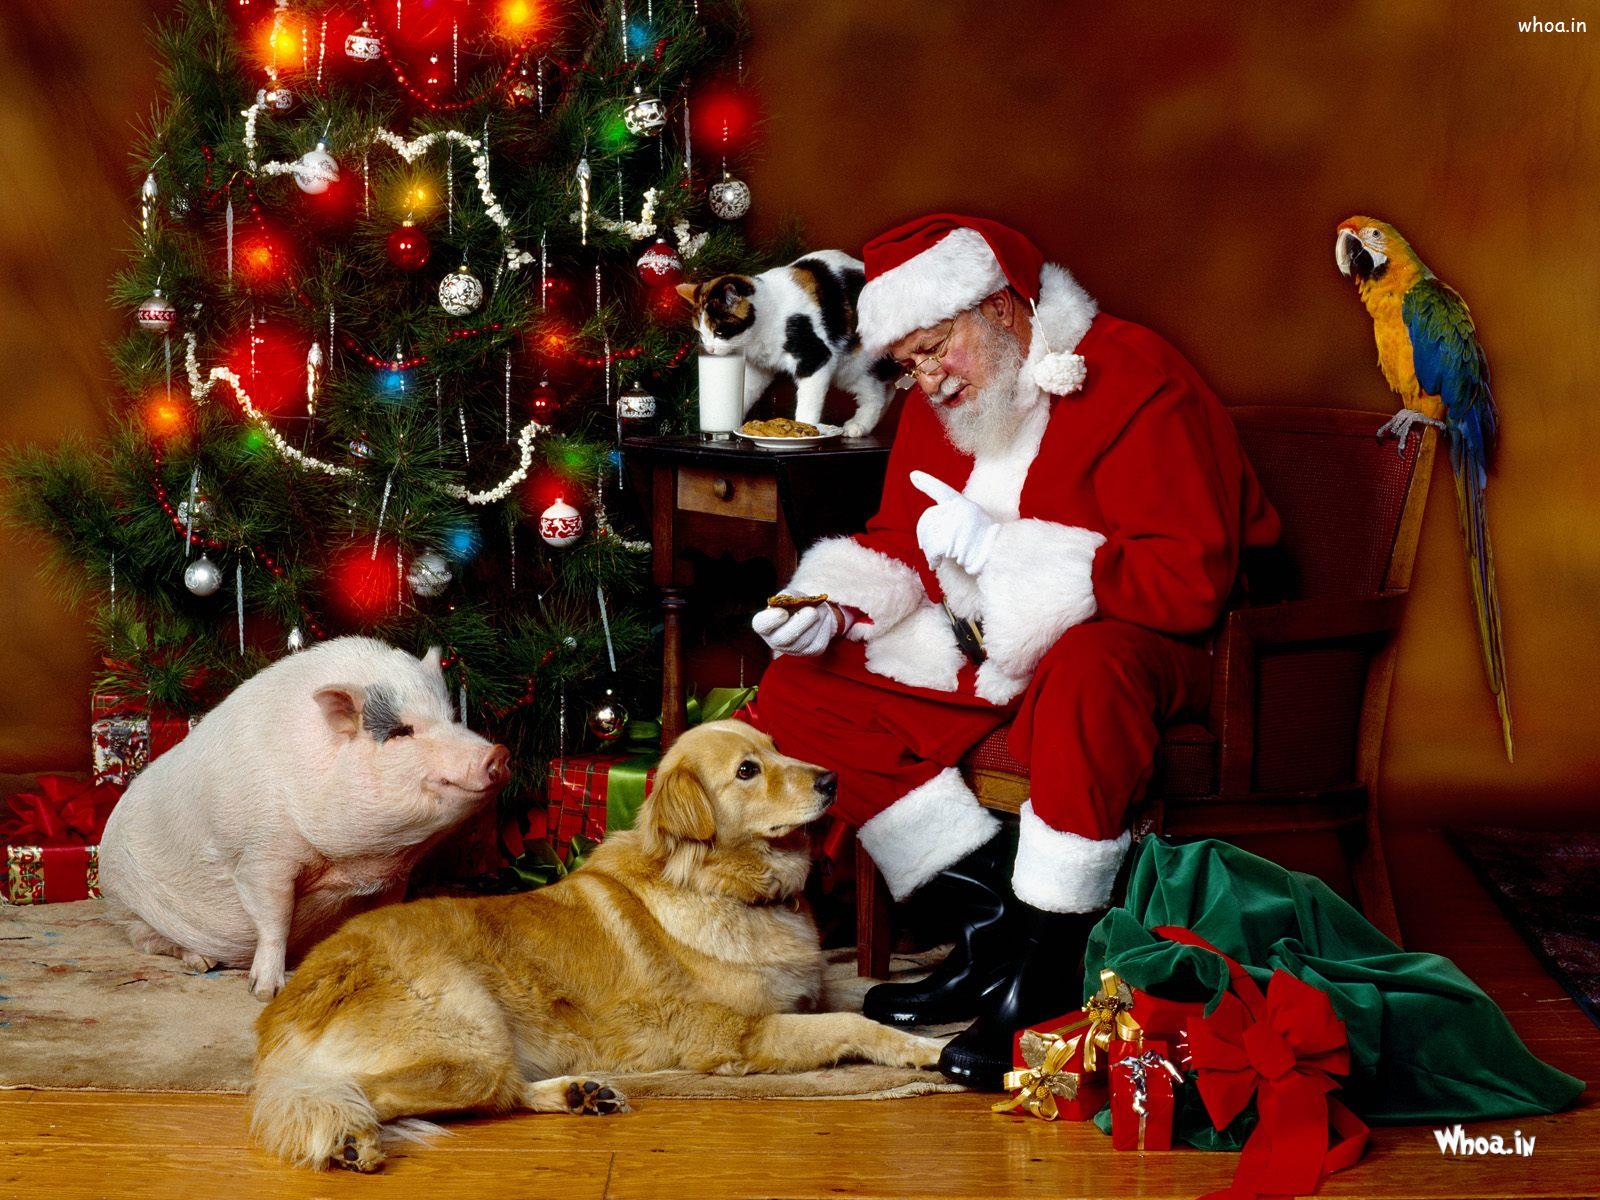 Santa Claus With Animals In Christmas